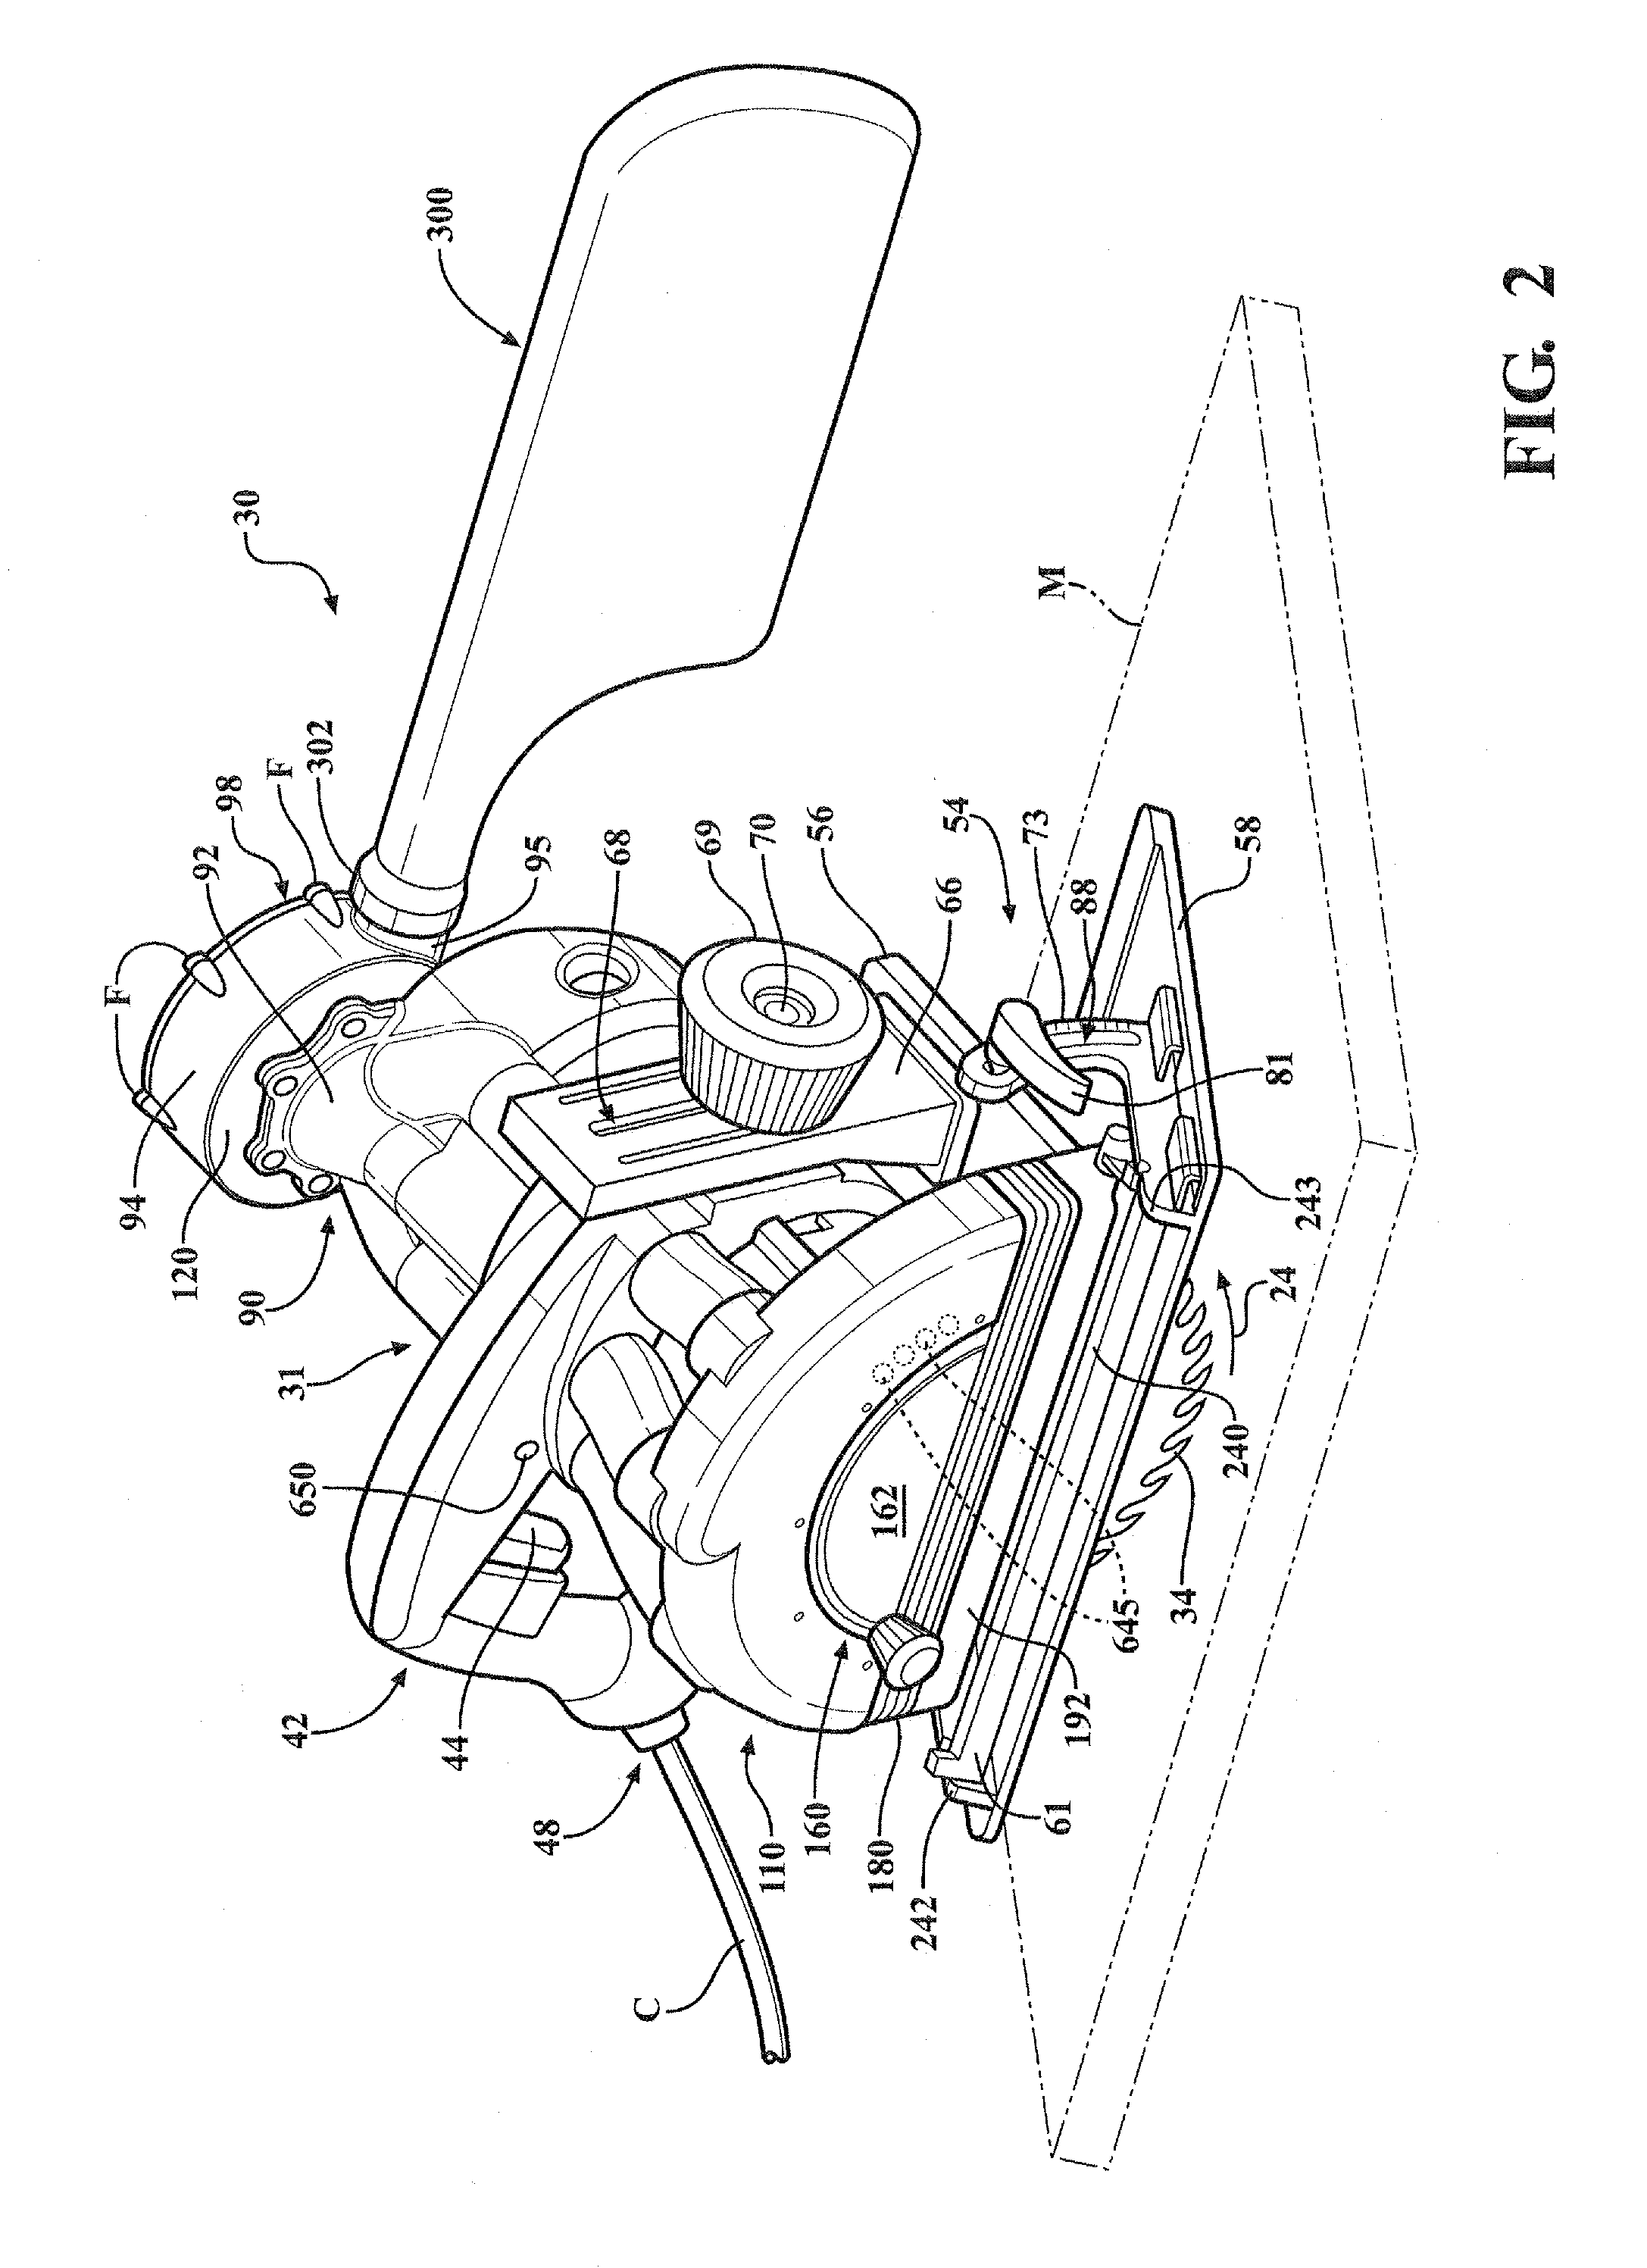 Portable cutting device with on-board debris collection